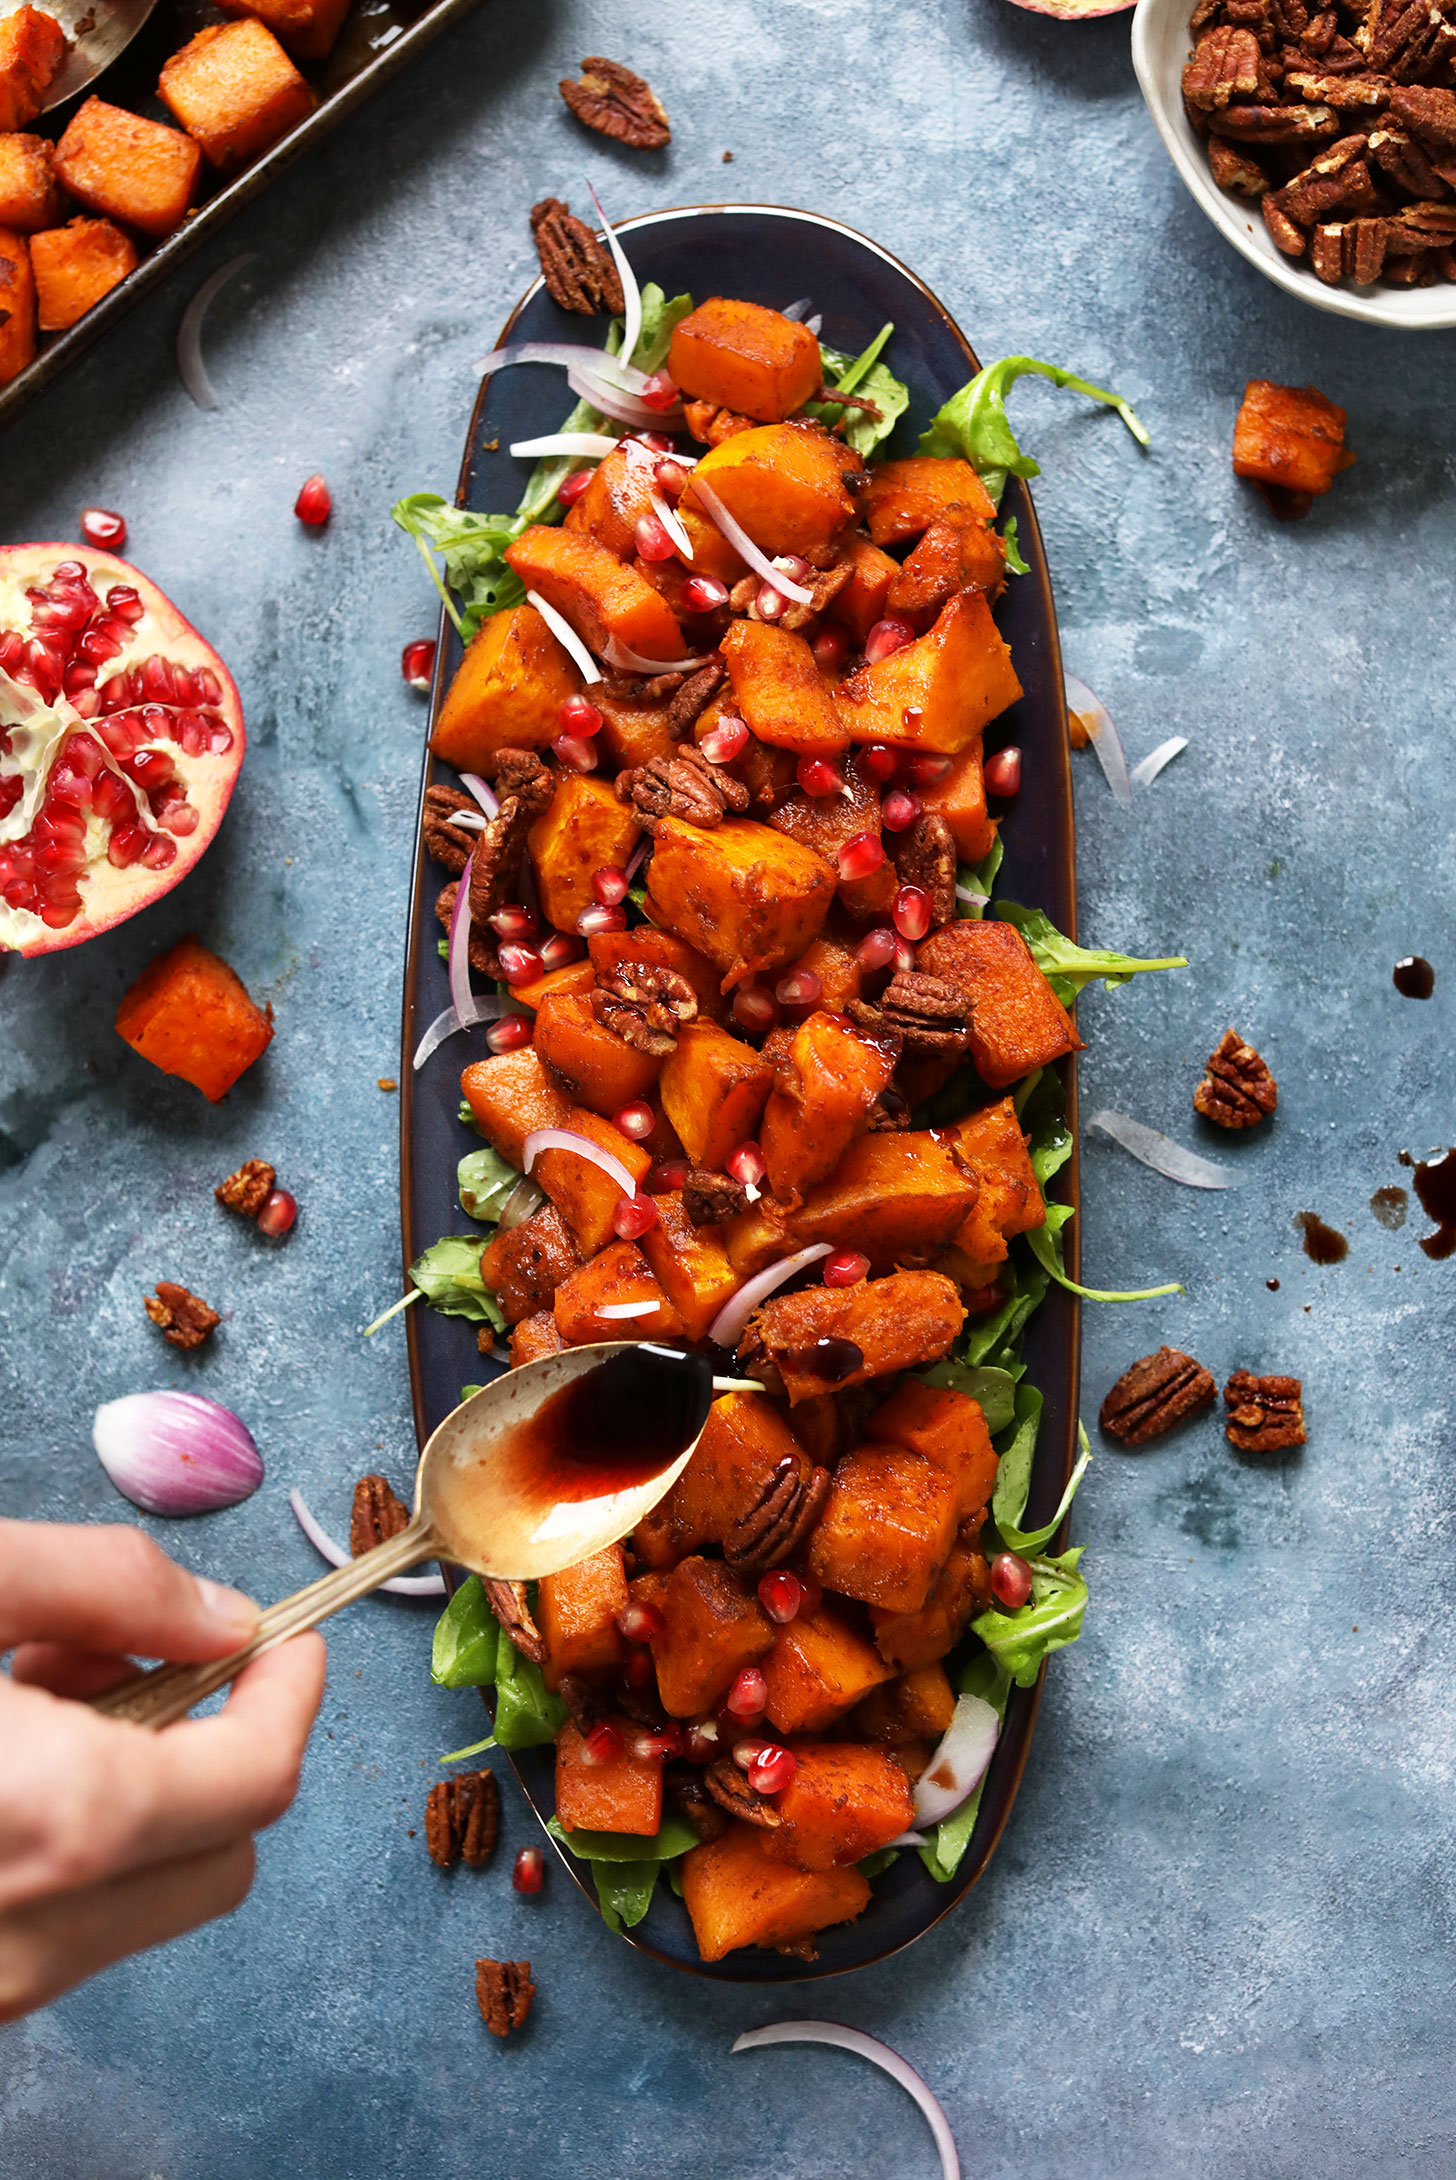 Drizzling pomegranate molasses over our Sweet Spicy Roasted Squash Salad with Cinnamon Sugar Pecans